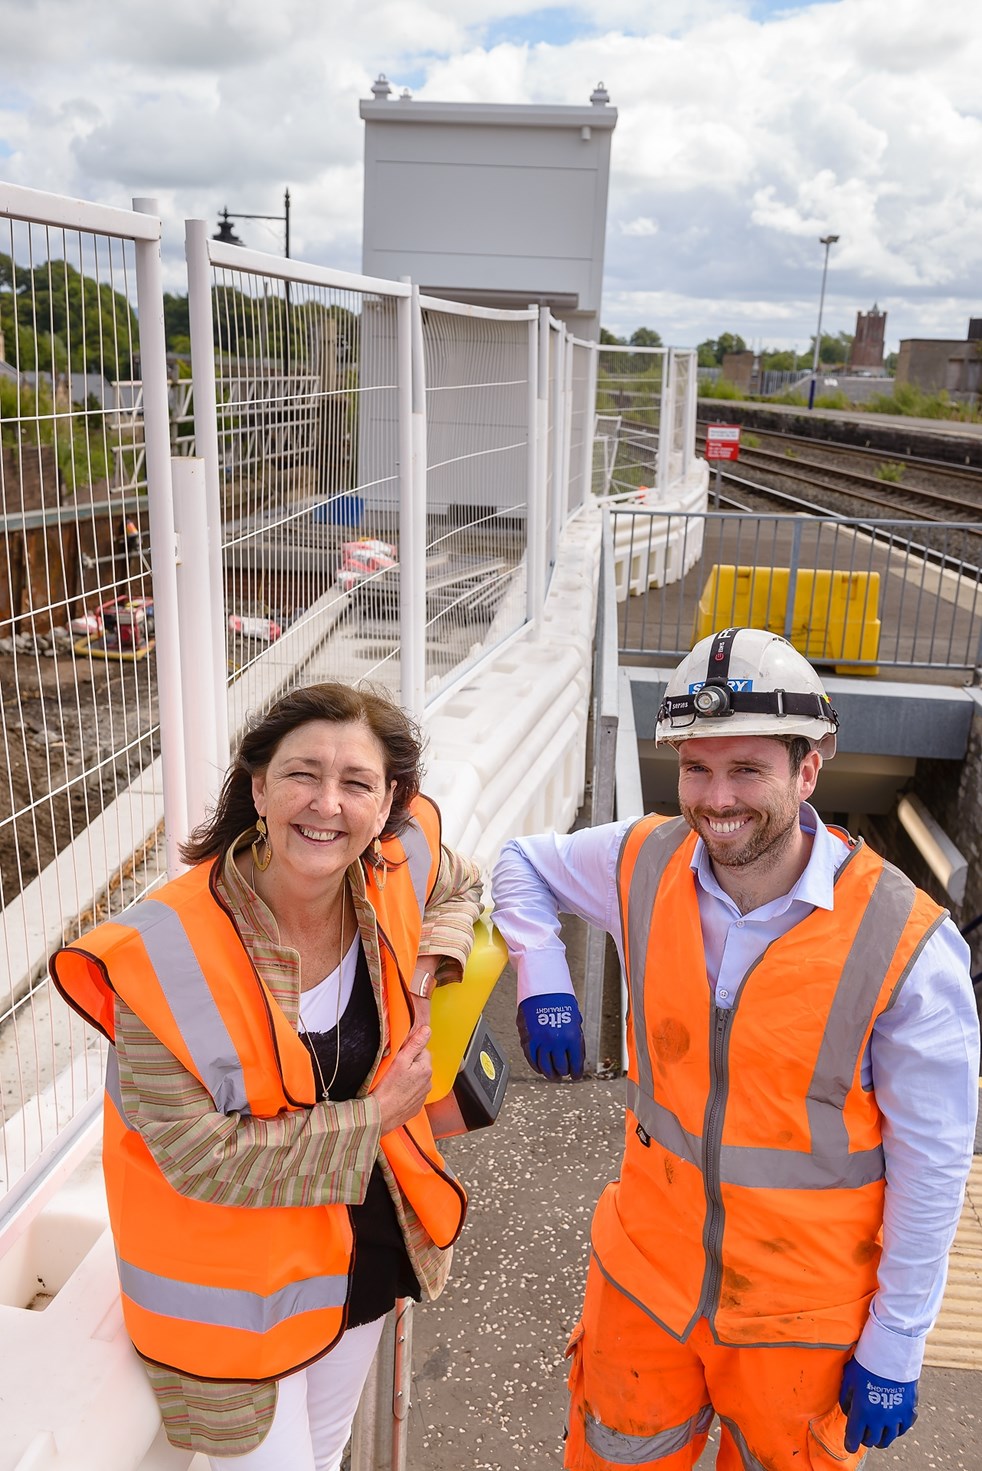 An uplifting Story story  - as station prepares to make access easier for all